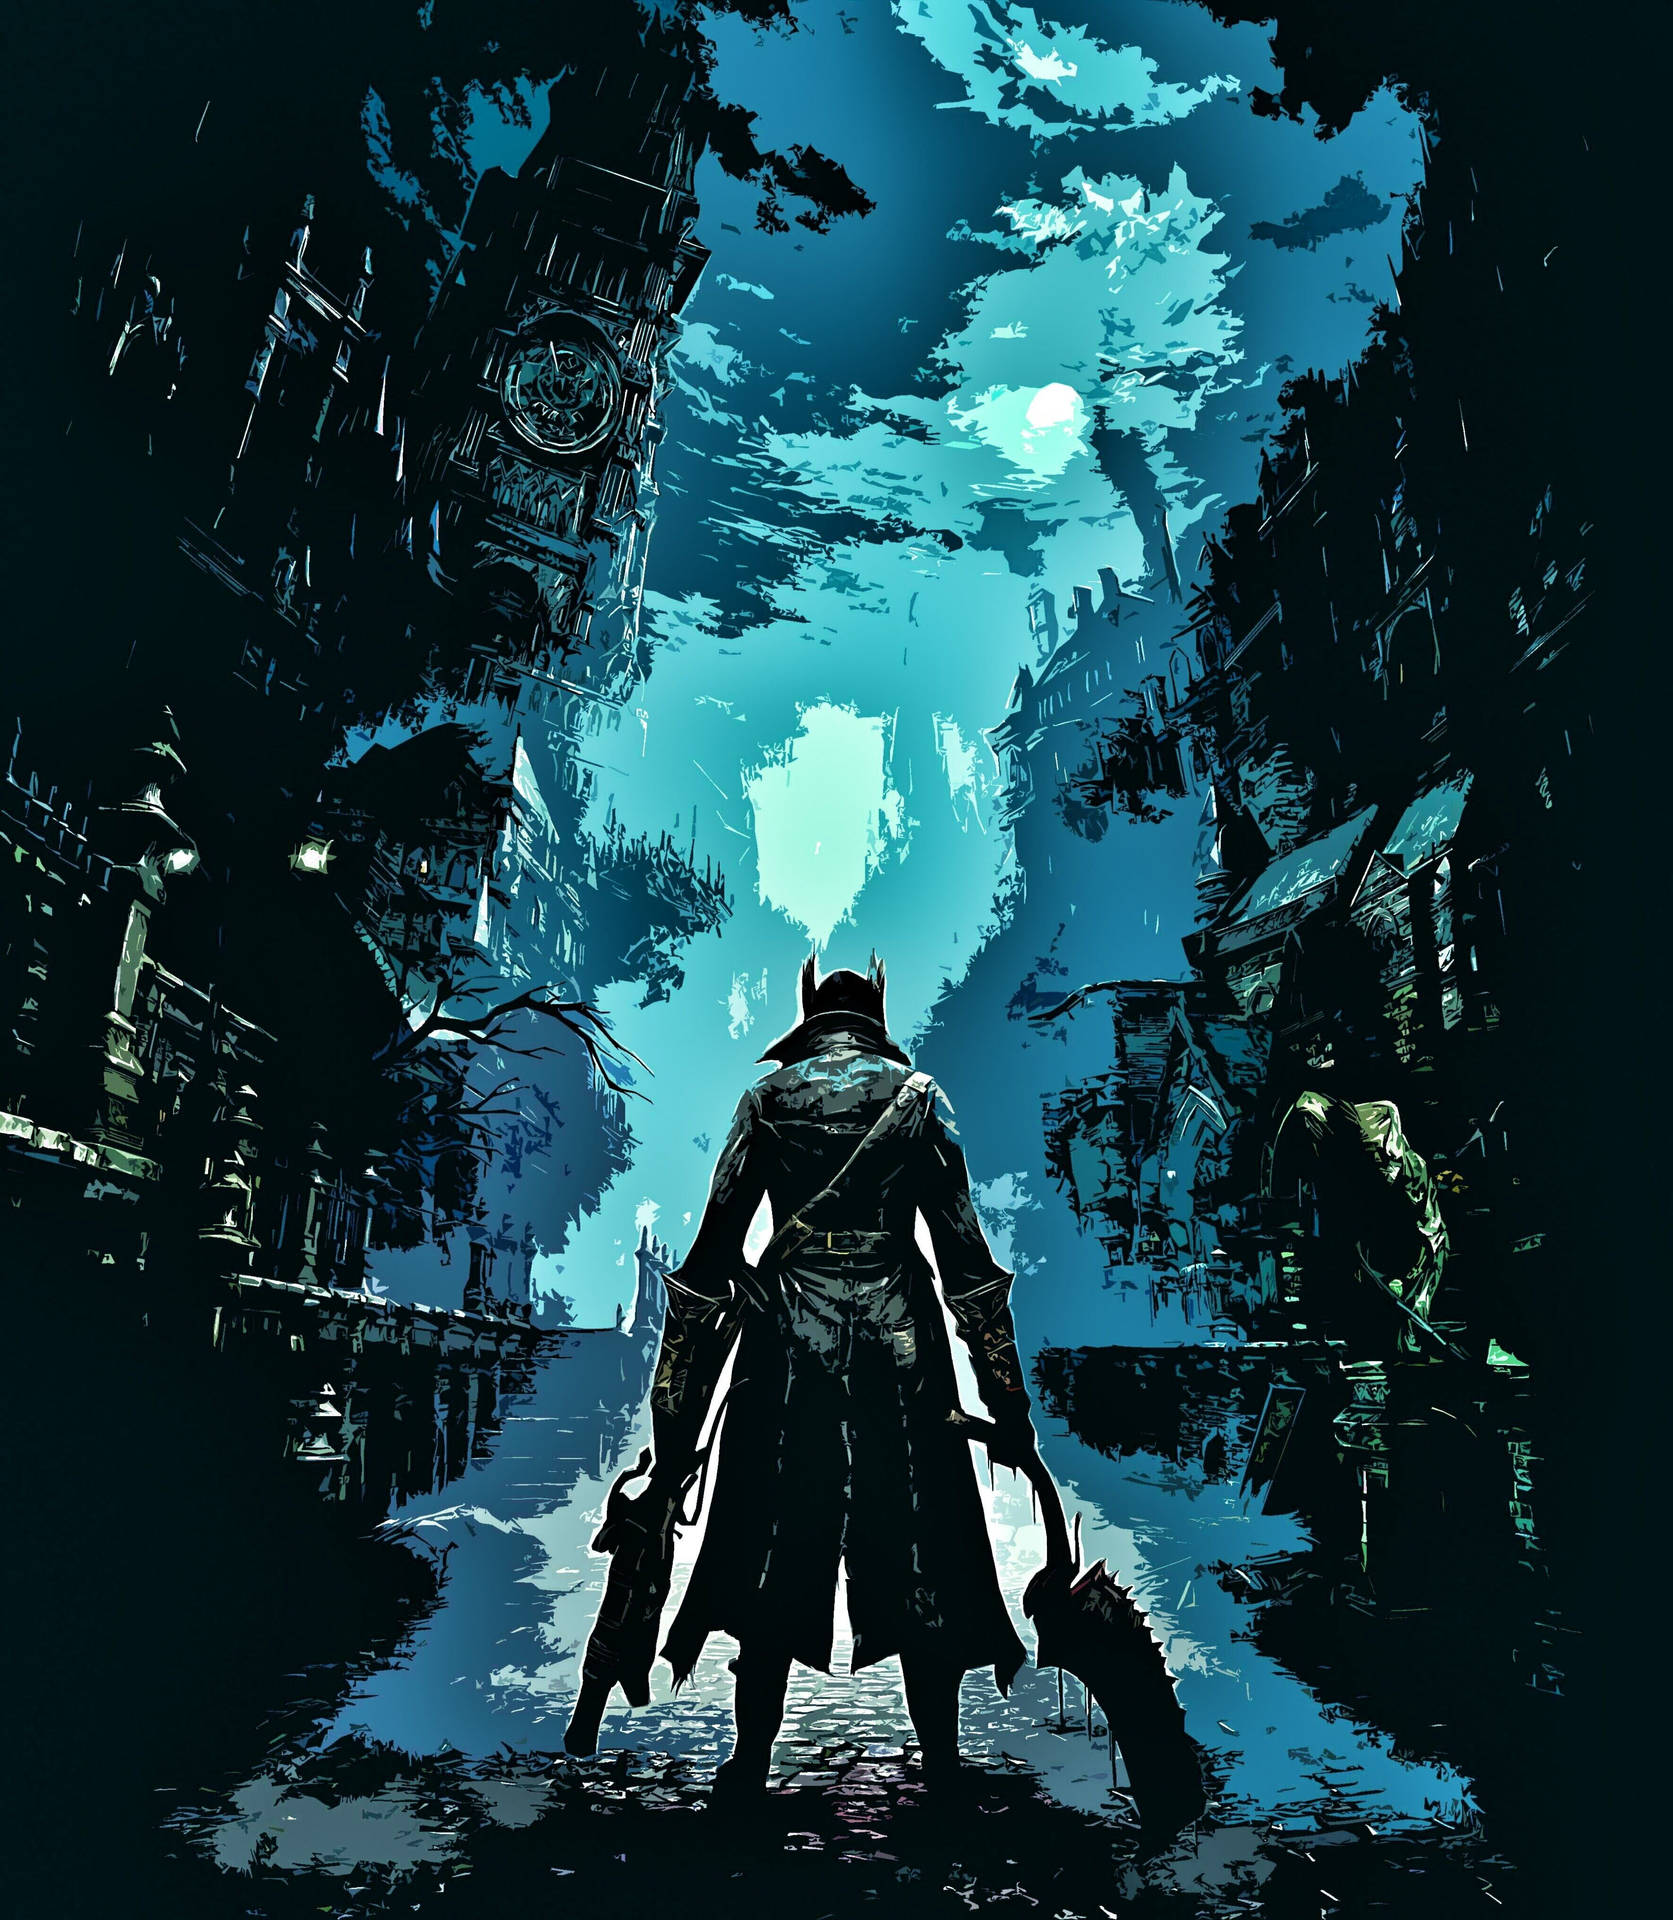 Hunting the ancient evil - Be the hunter and defeat your enemies in the Blue Edition of Bloodborne Wallpaper